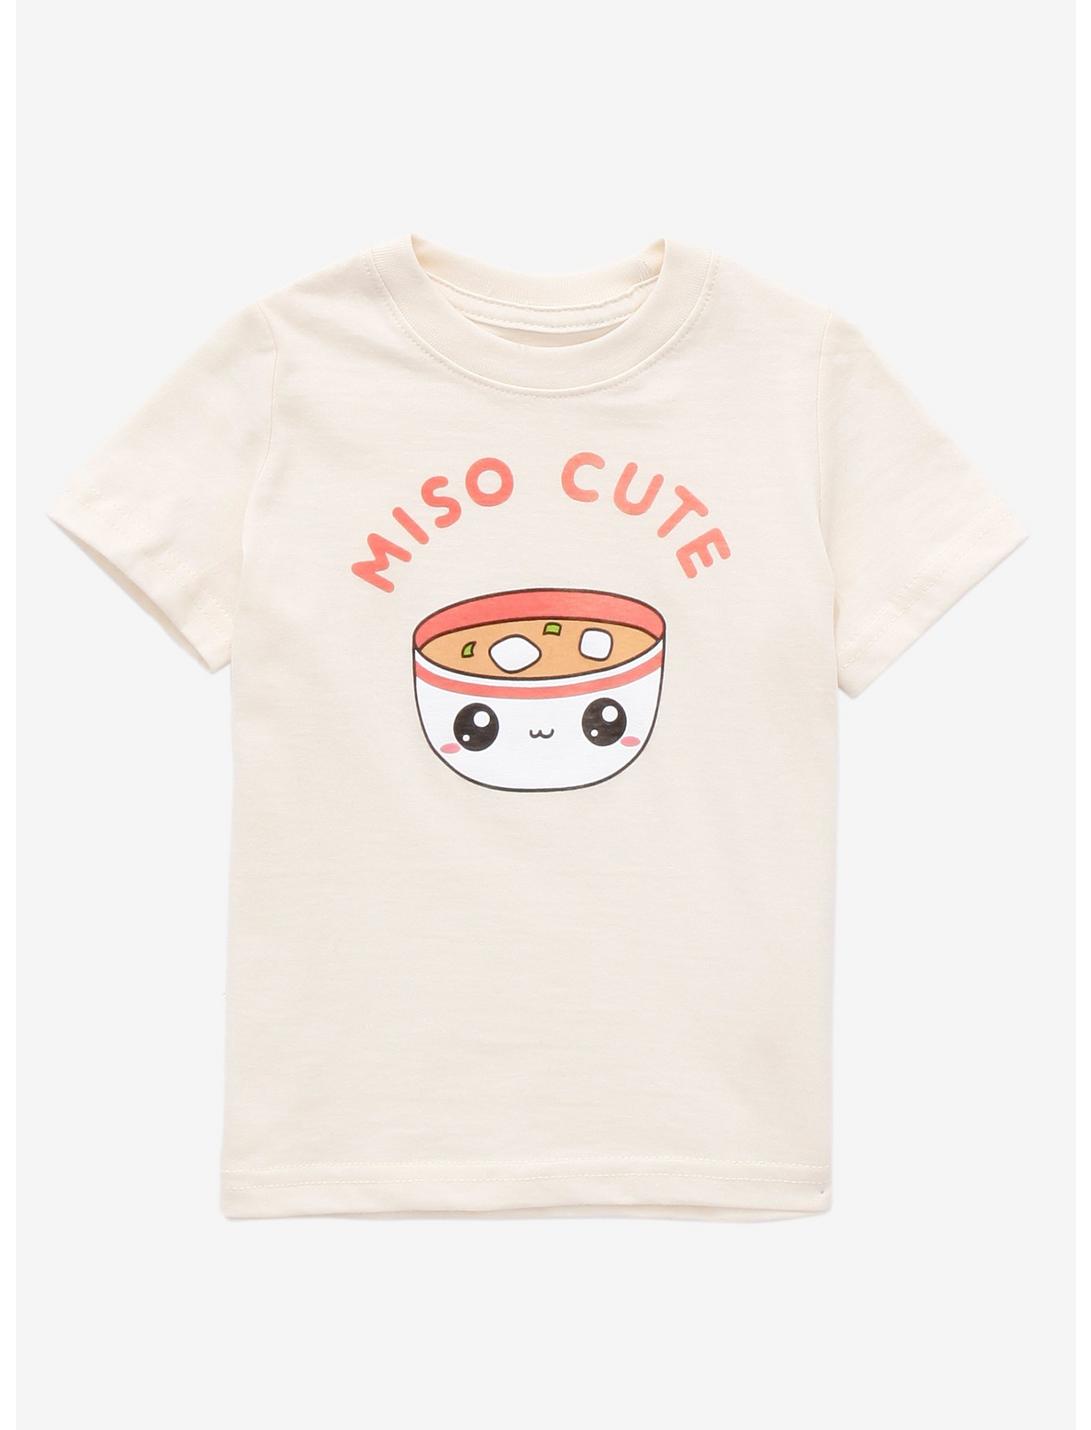 Miso Cute Toddler T-Shirt - BoxLunch Exclusive, , hi-res